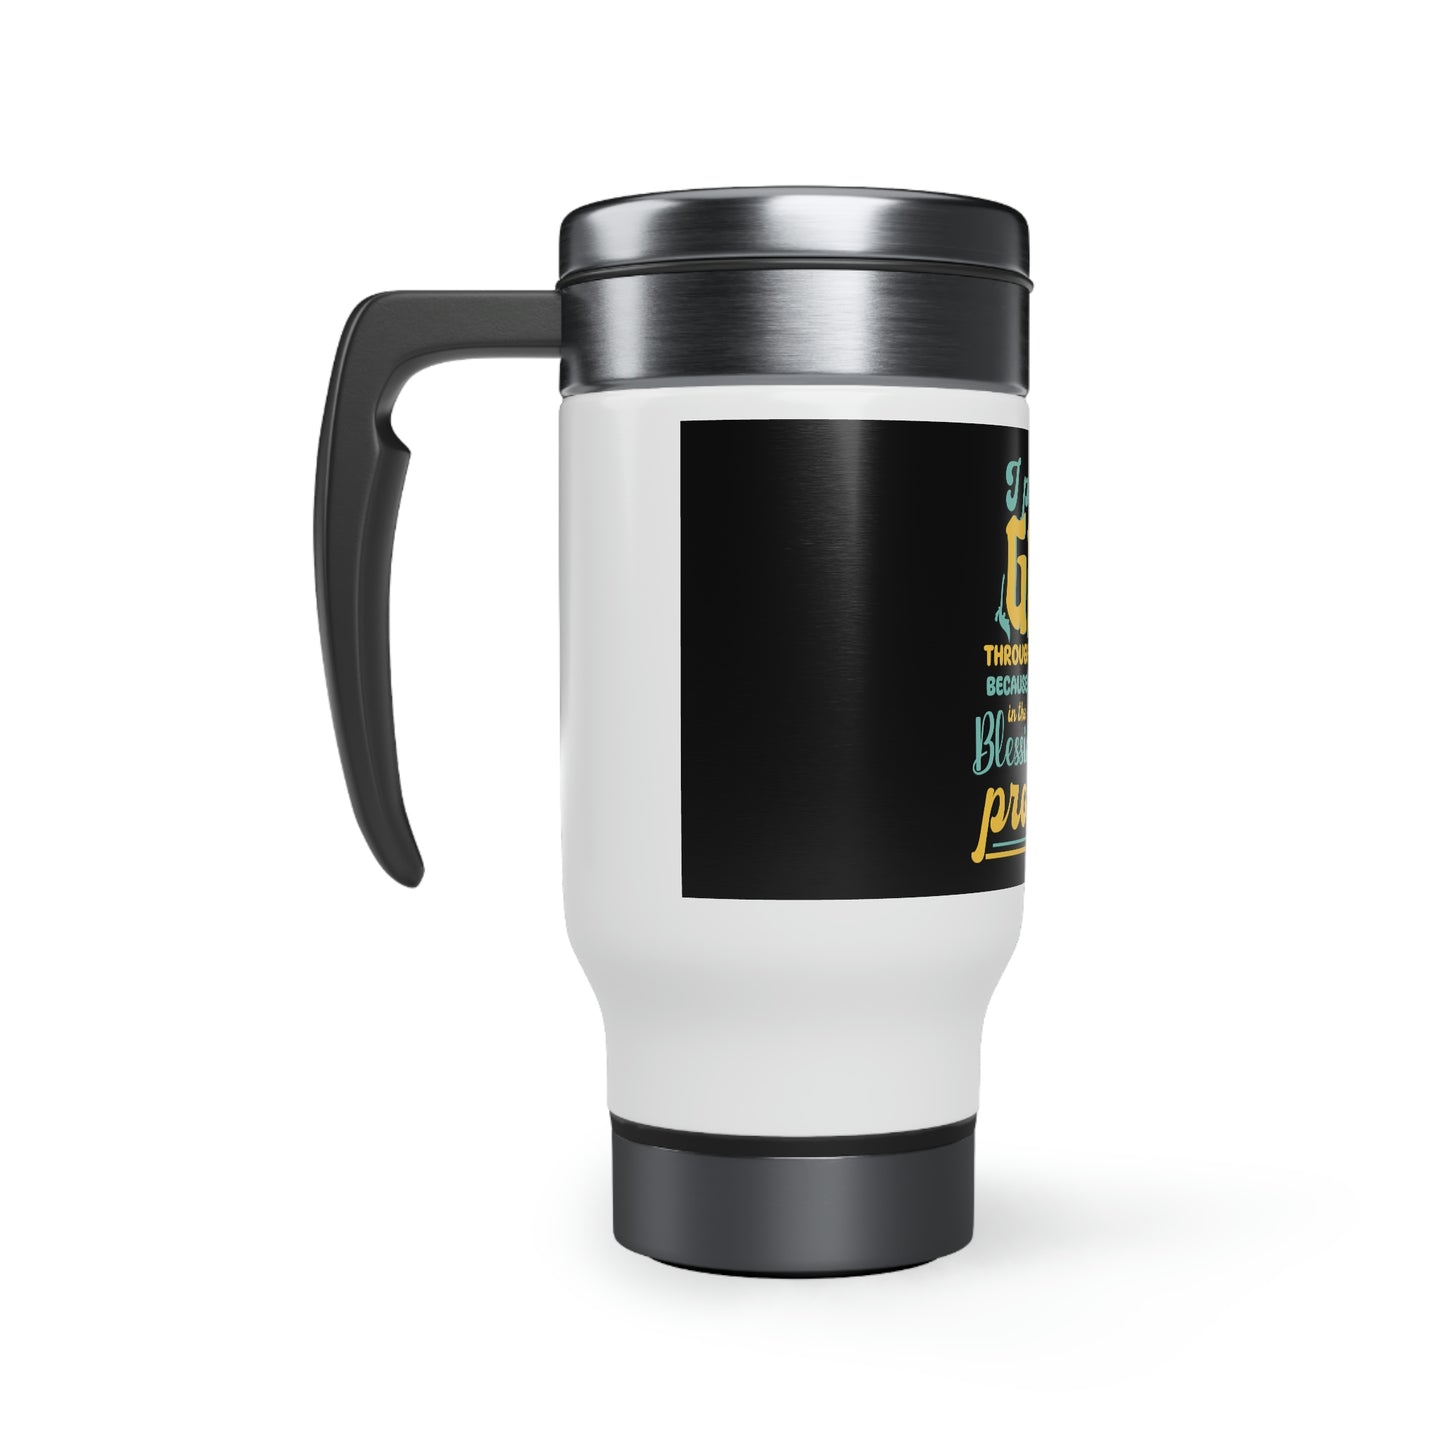 I Praise God Through The Storm Because I Trust In The Blessings Of His Promise Travel Mug with Handle, 14oz